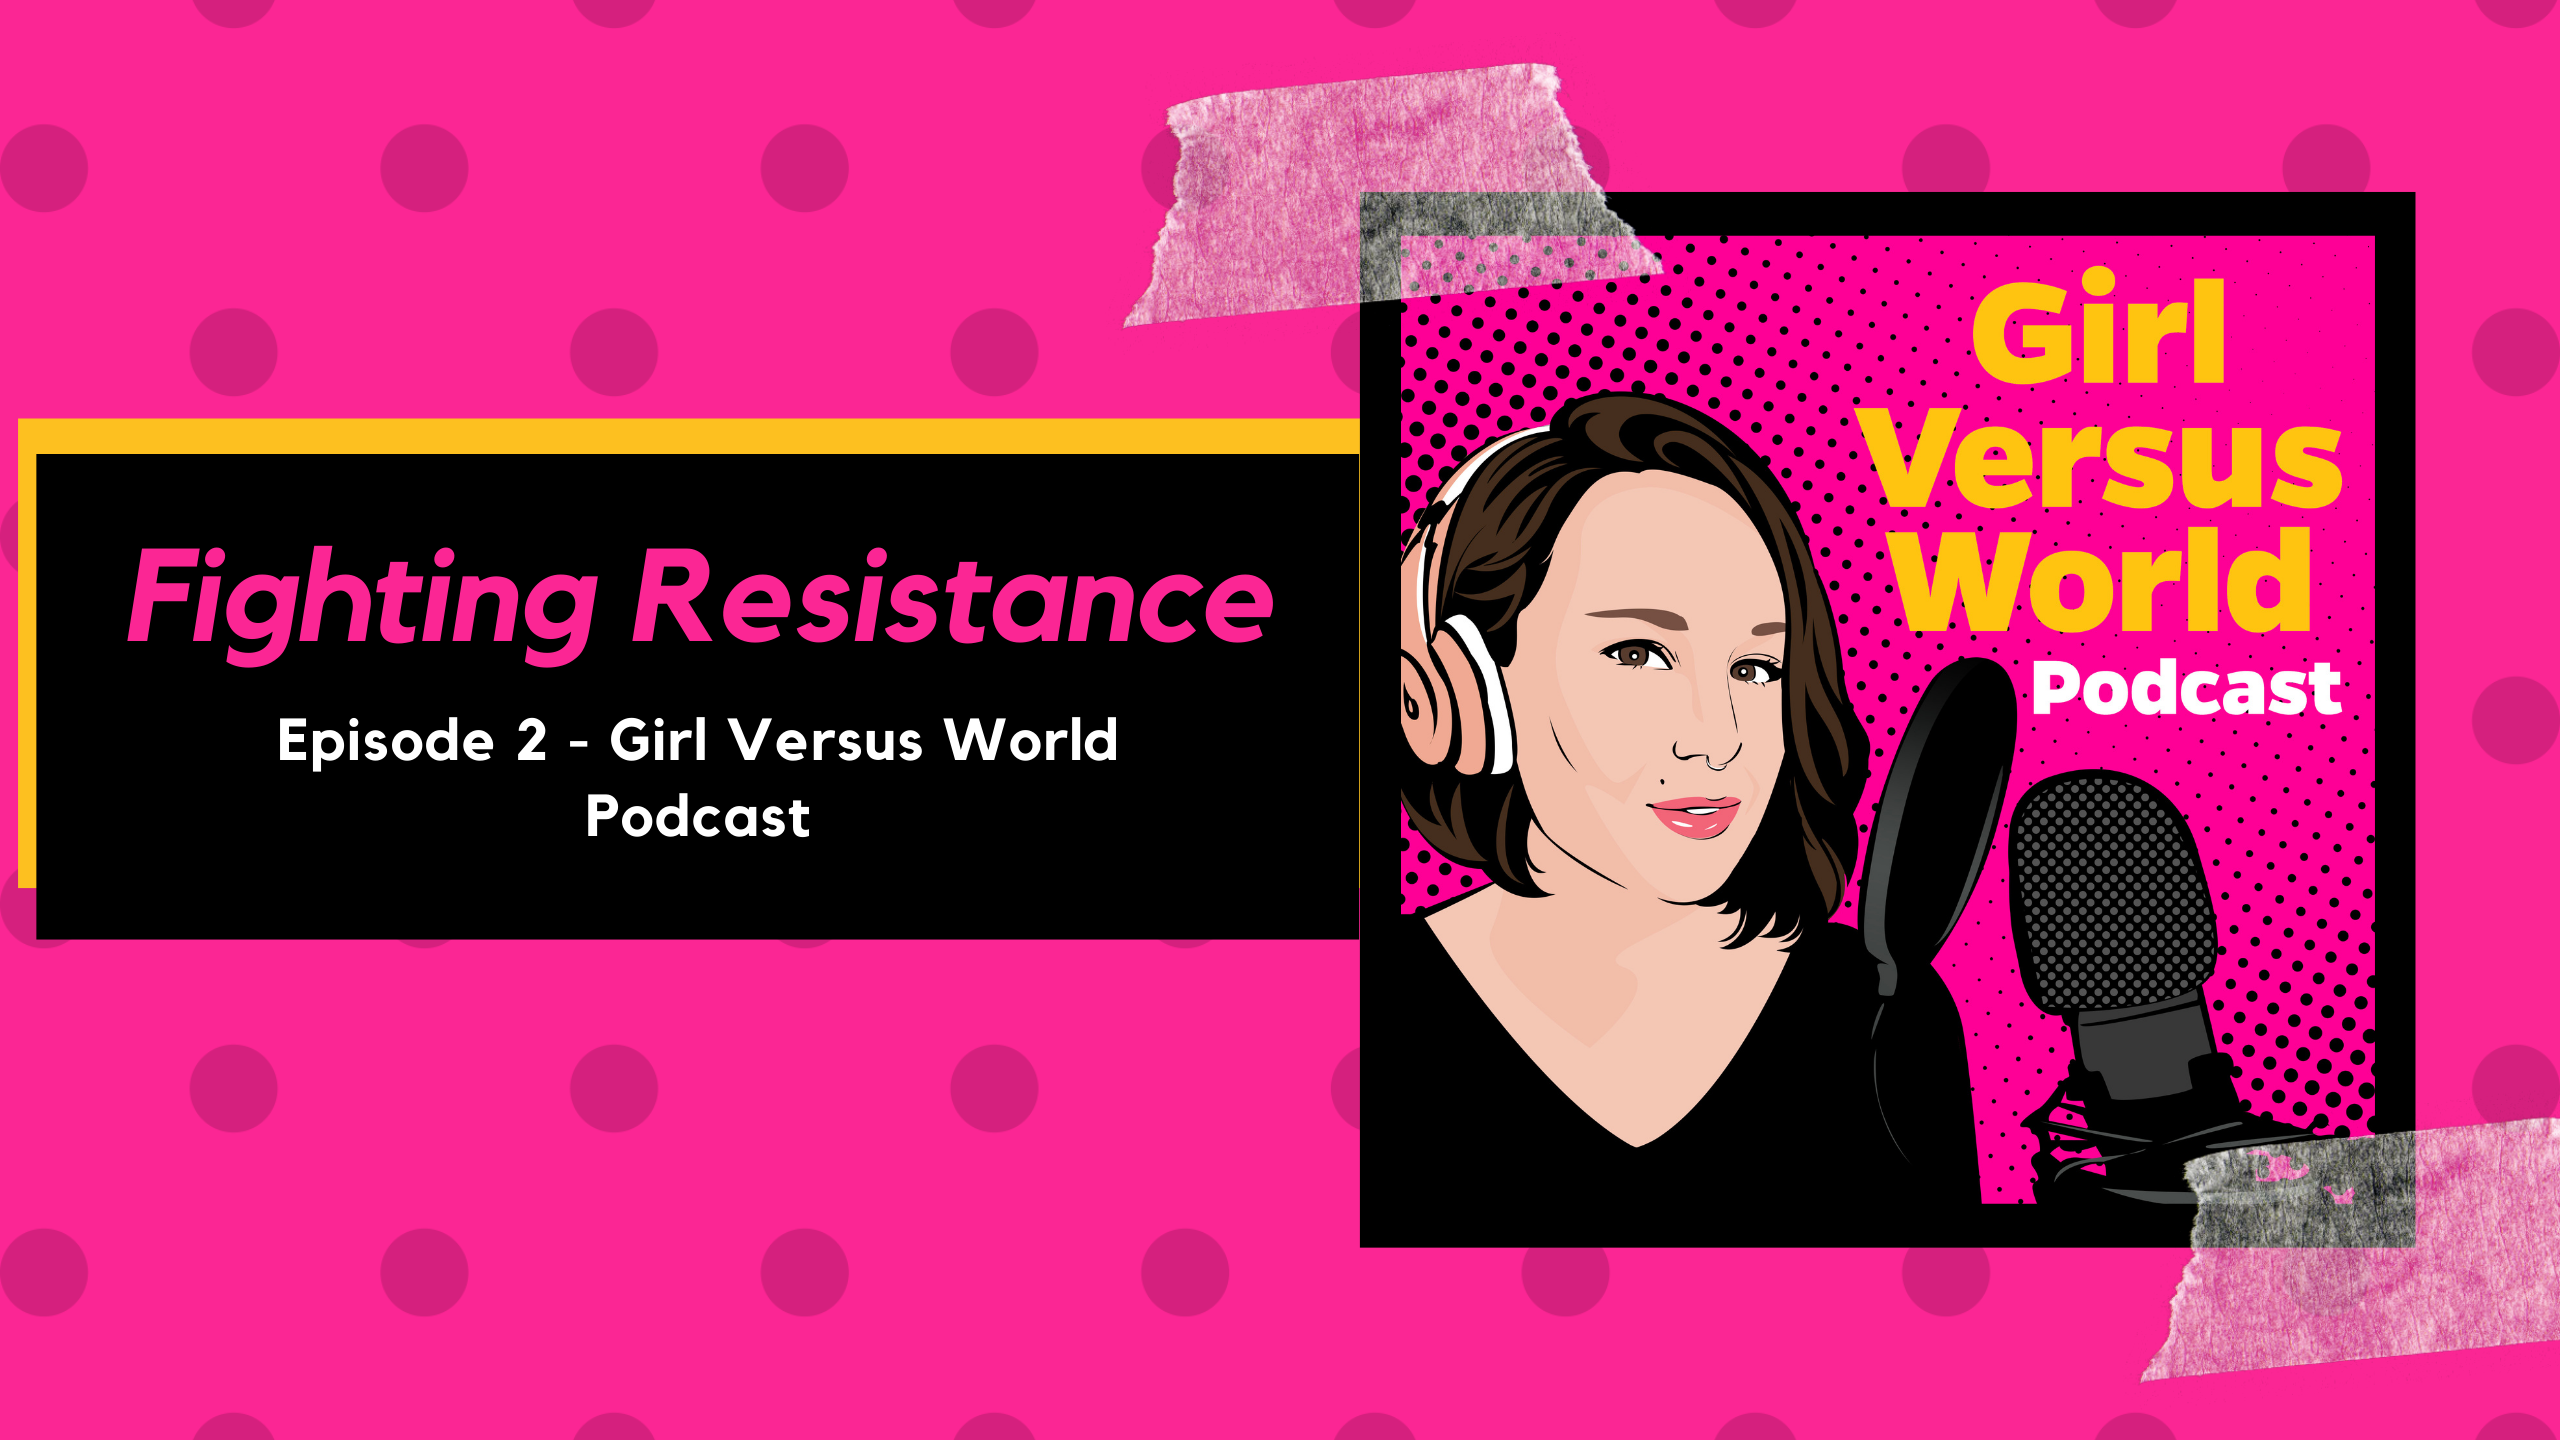 Podcast Episode 3: Fighting Resistance